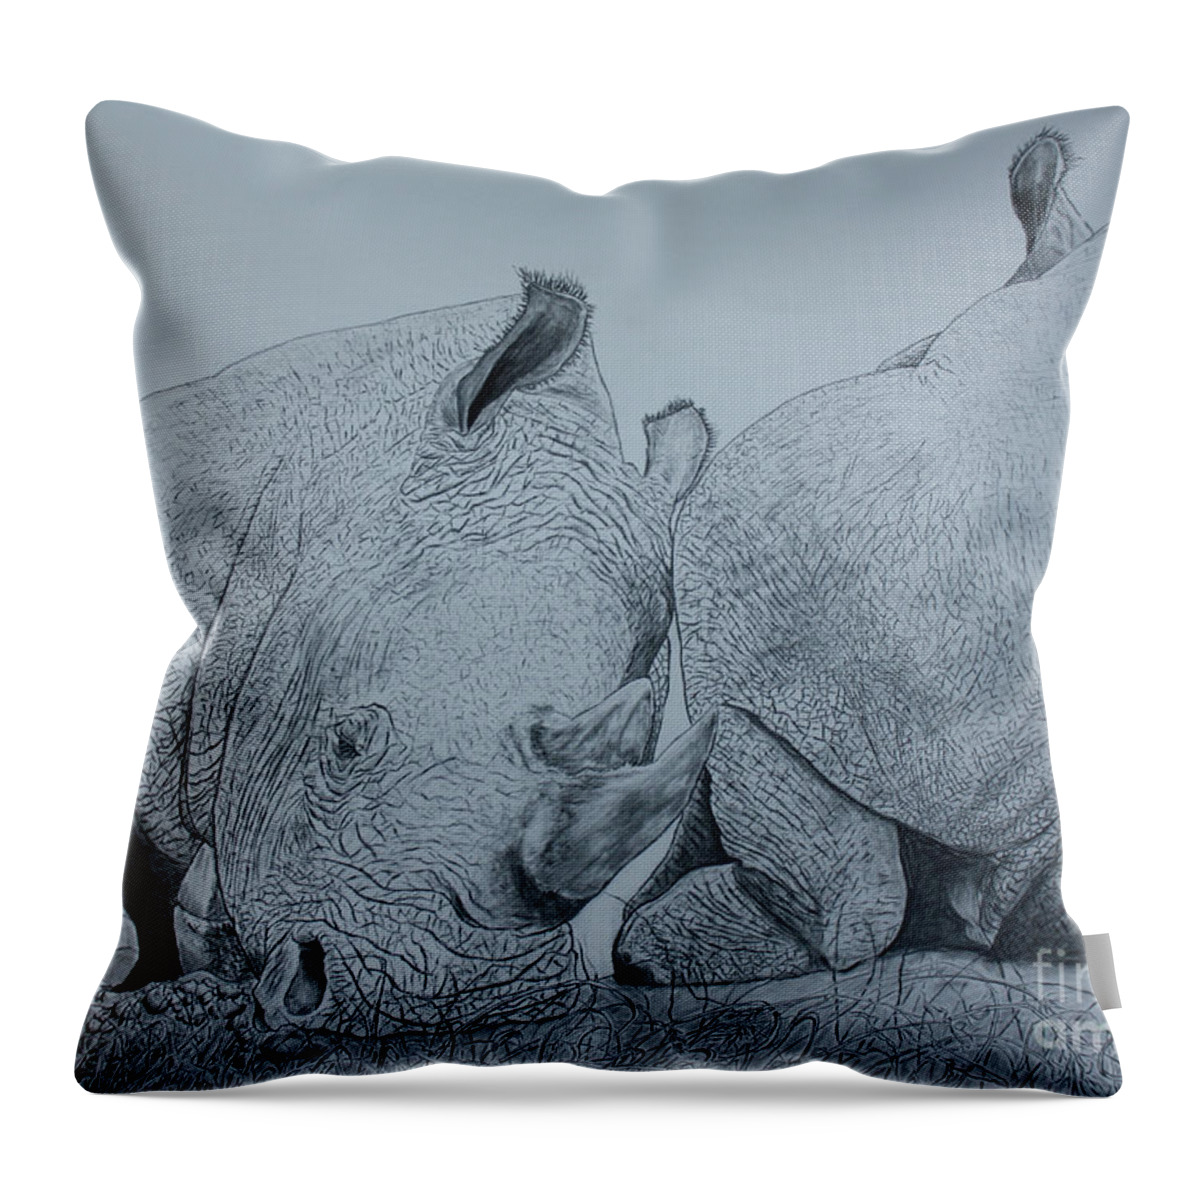 Rhinoceros Throw Pillow featuring the drawing Heads or Tails by David Joyner